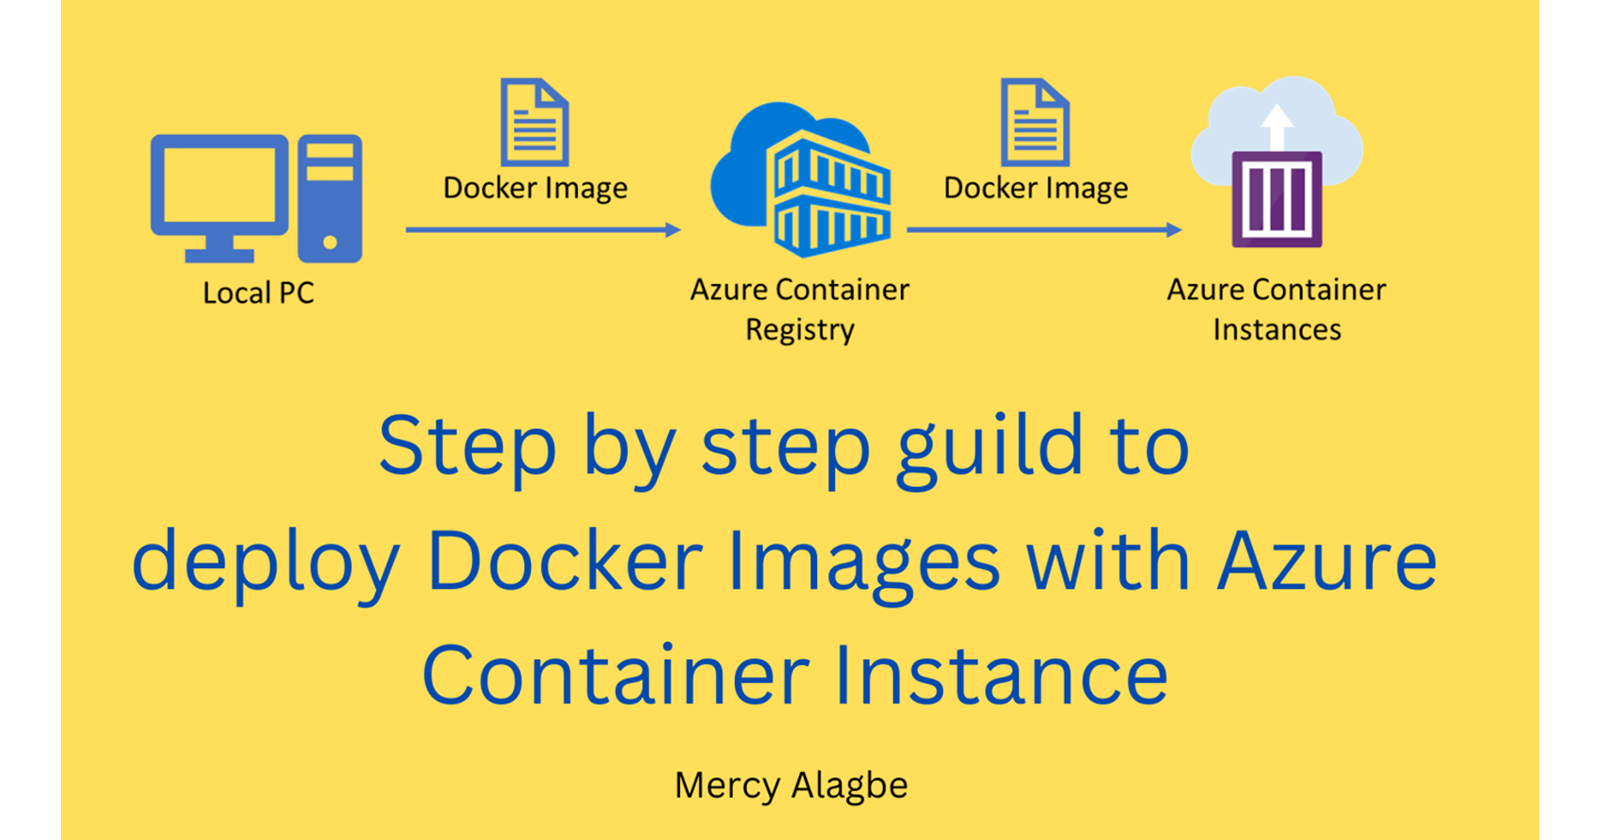 Step by step guild  to deploy Docker Images with Azure Container Instance